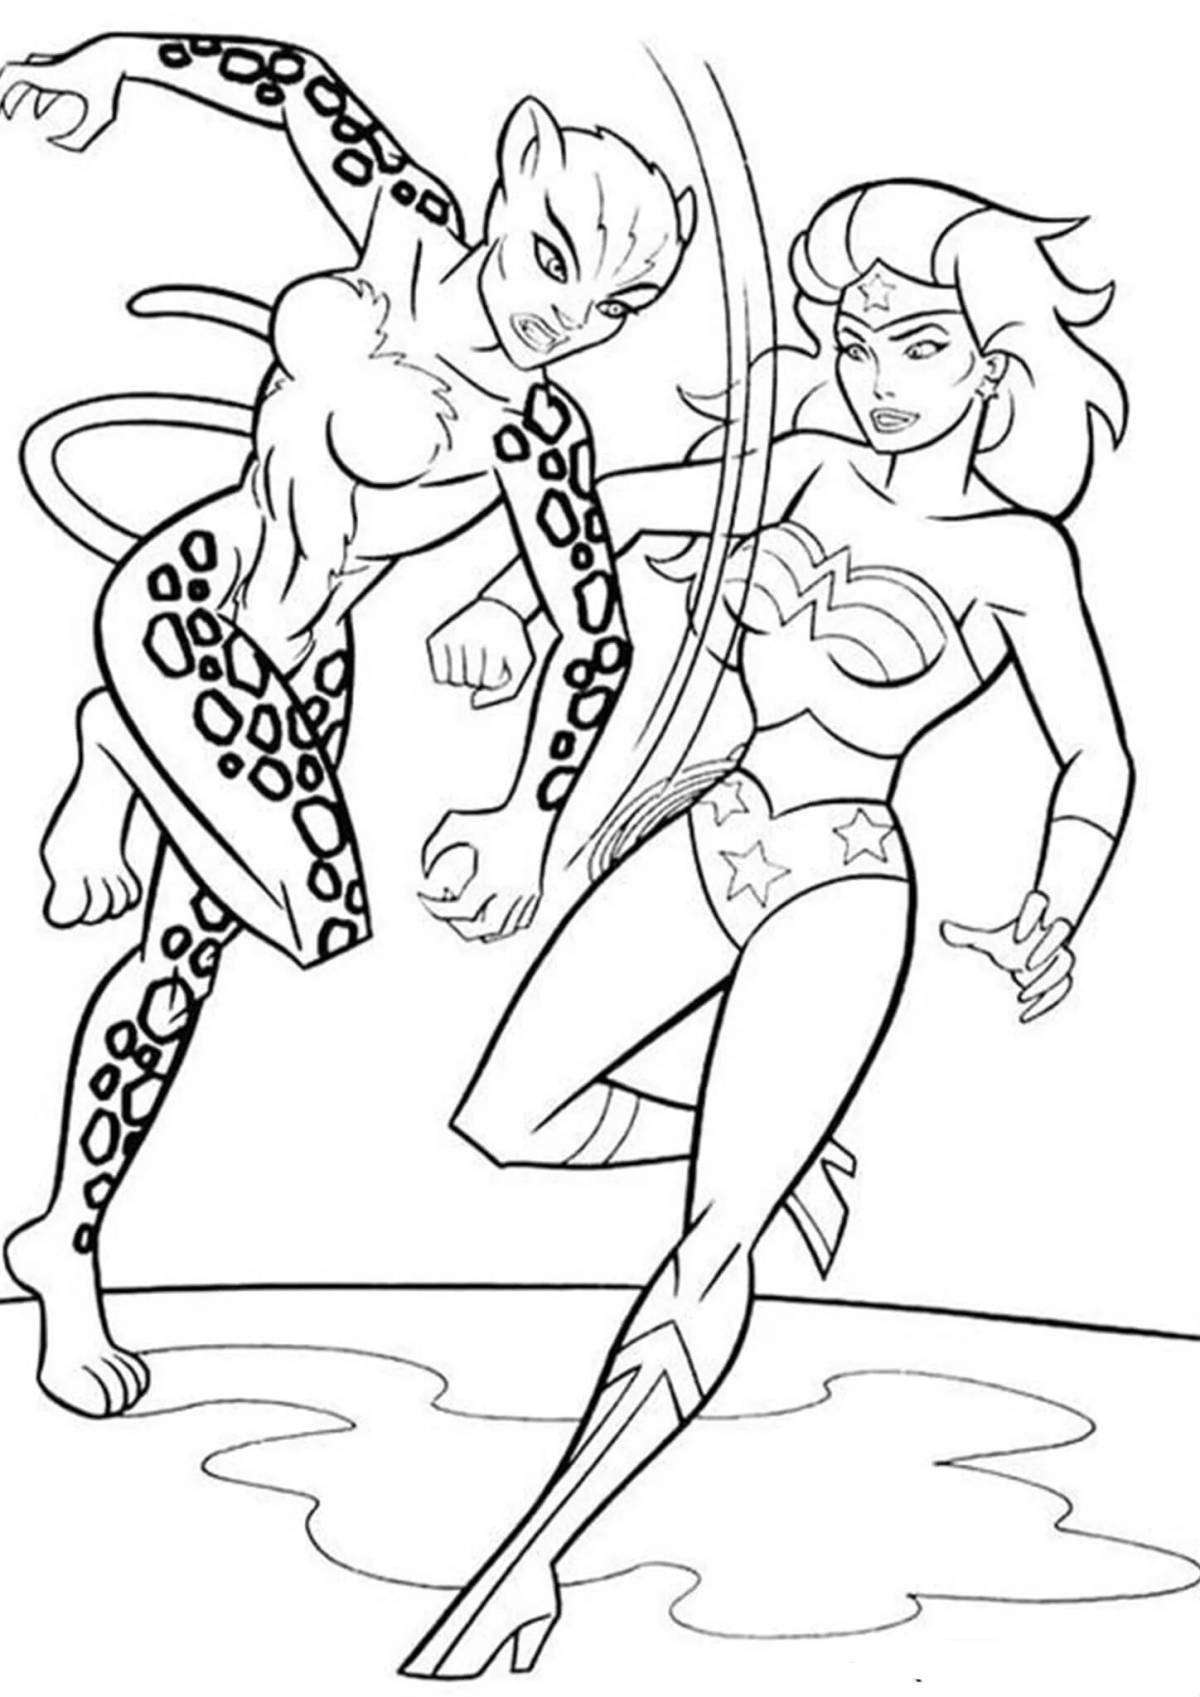 Great superwoman coloring page